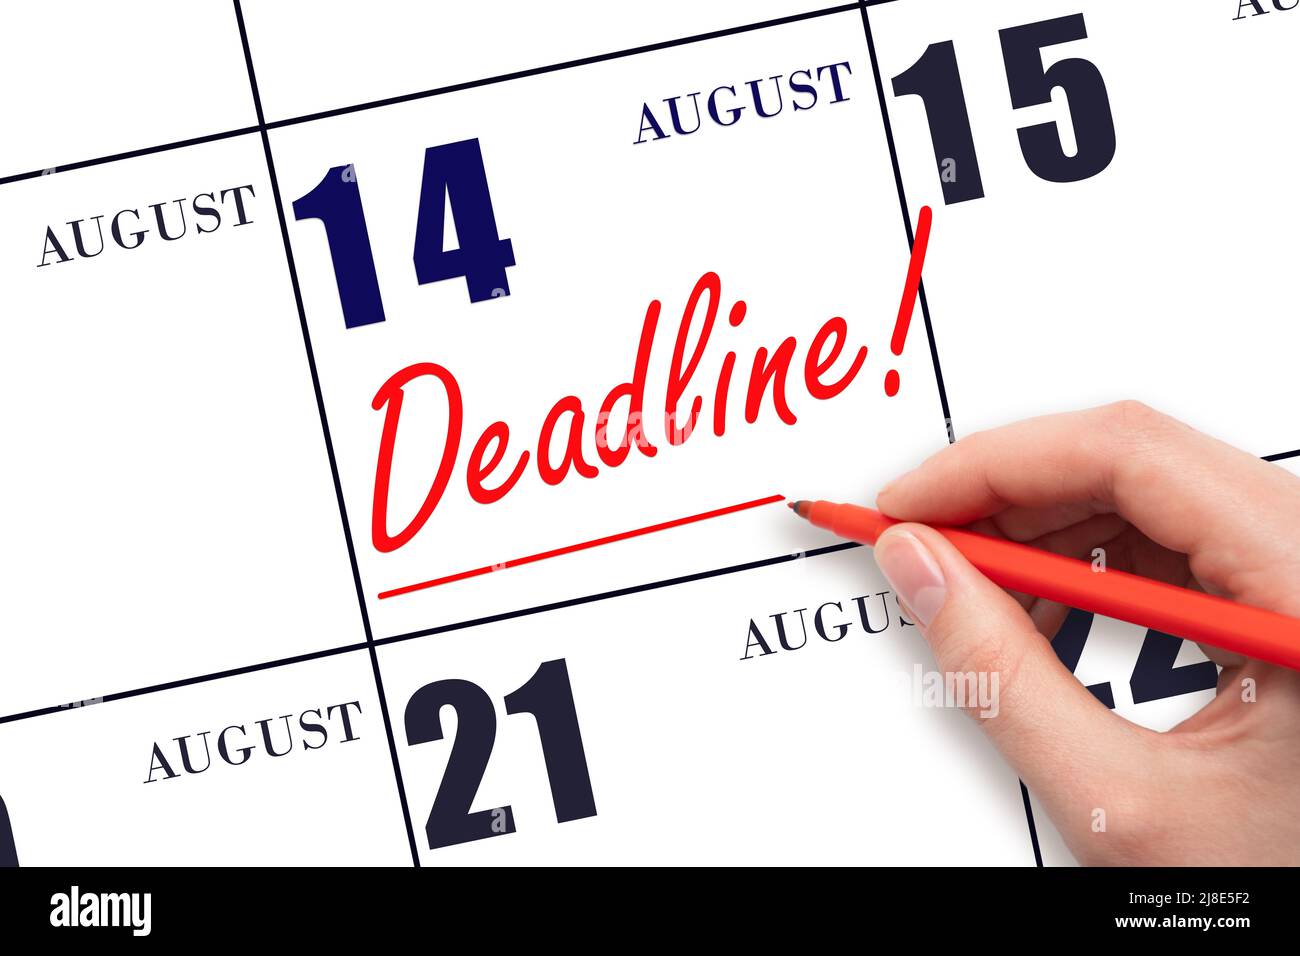 14th day of August. Hand drawing red line and writing the text Deadline on calendar date August 14. Deadline word written on calendar Summer month, da Stock Photo